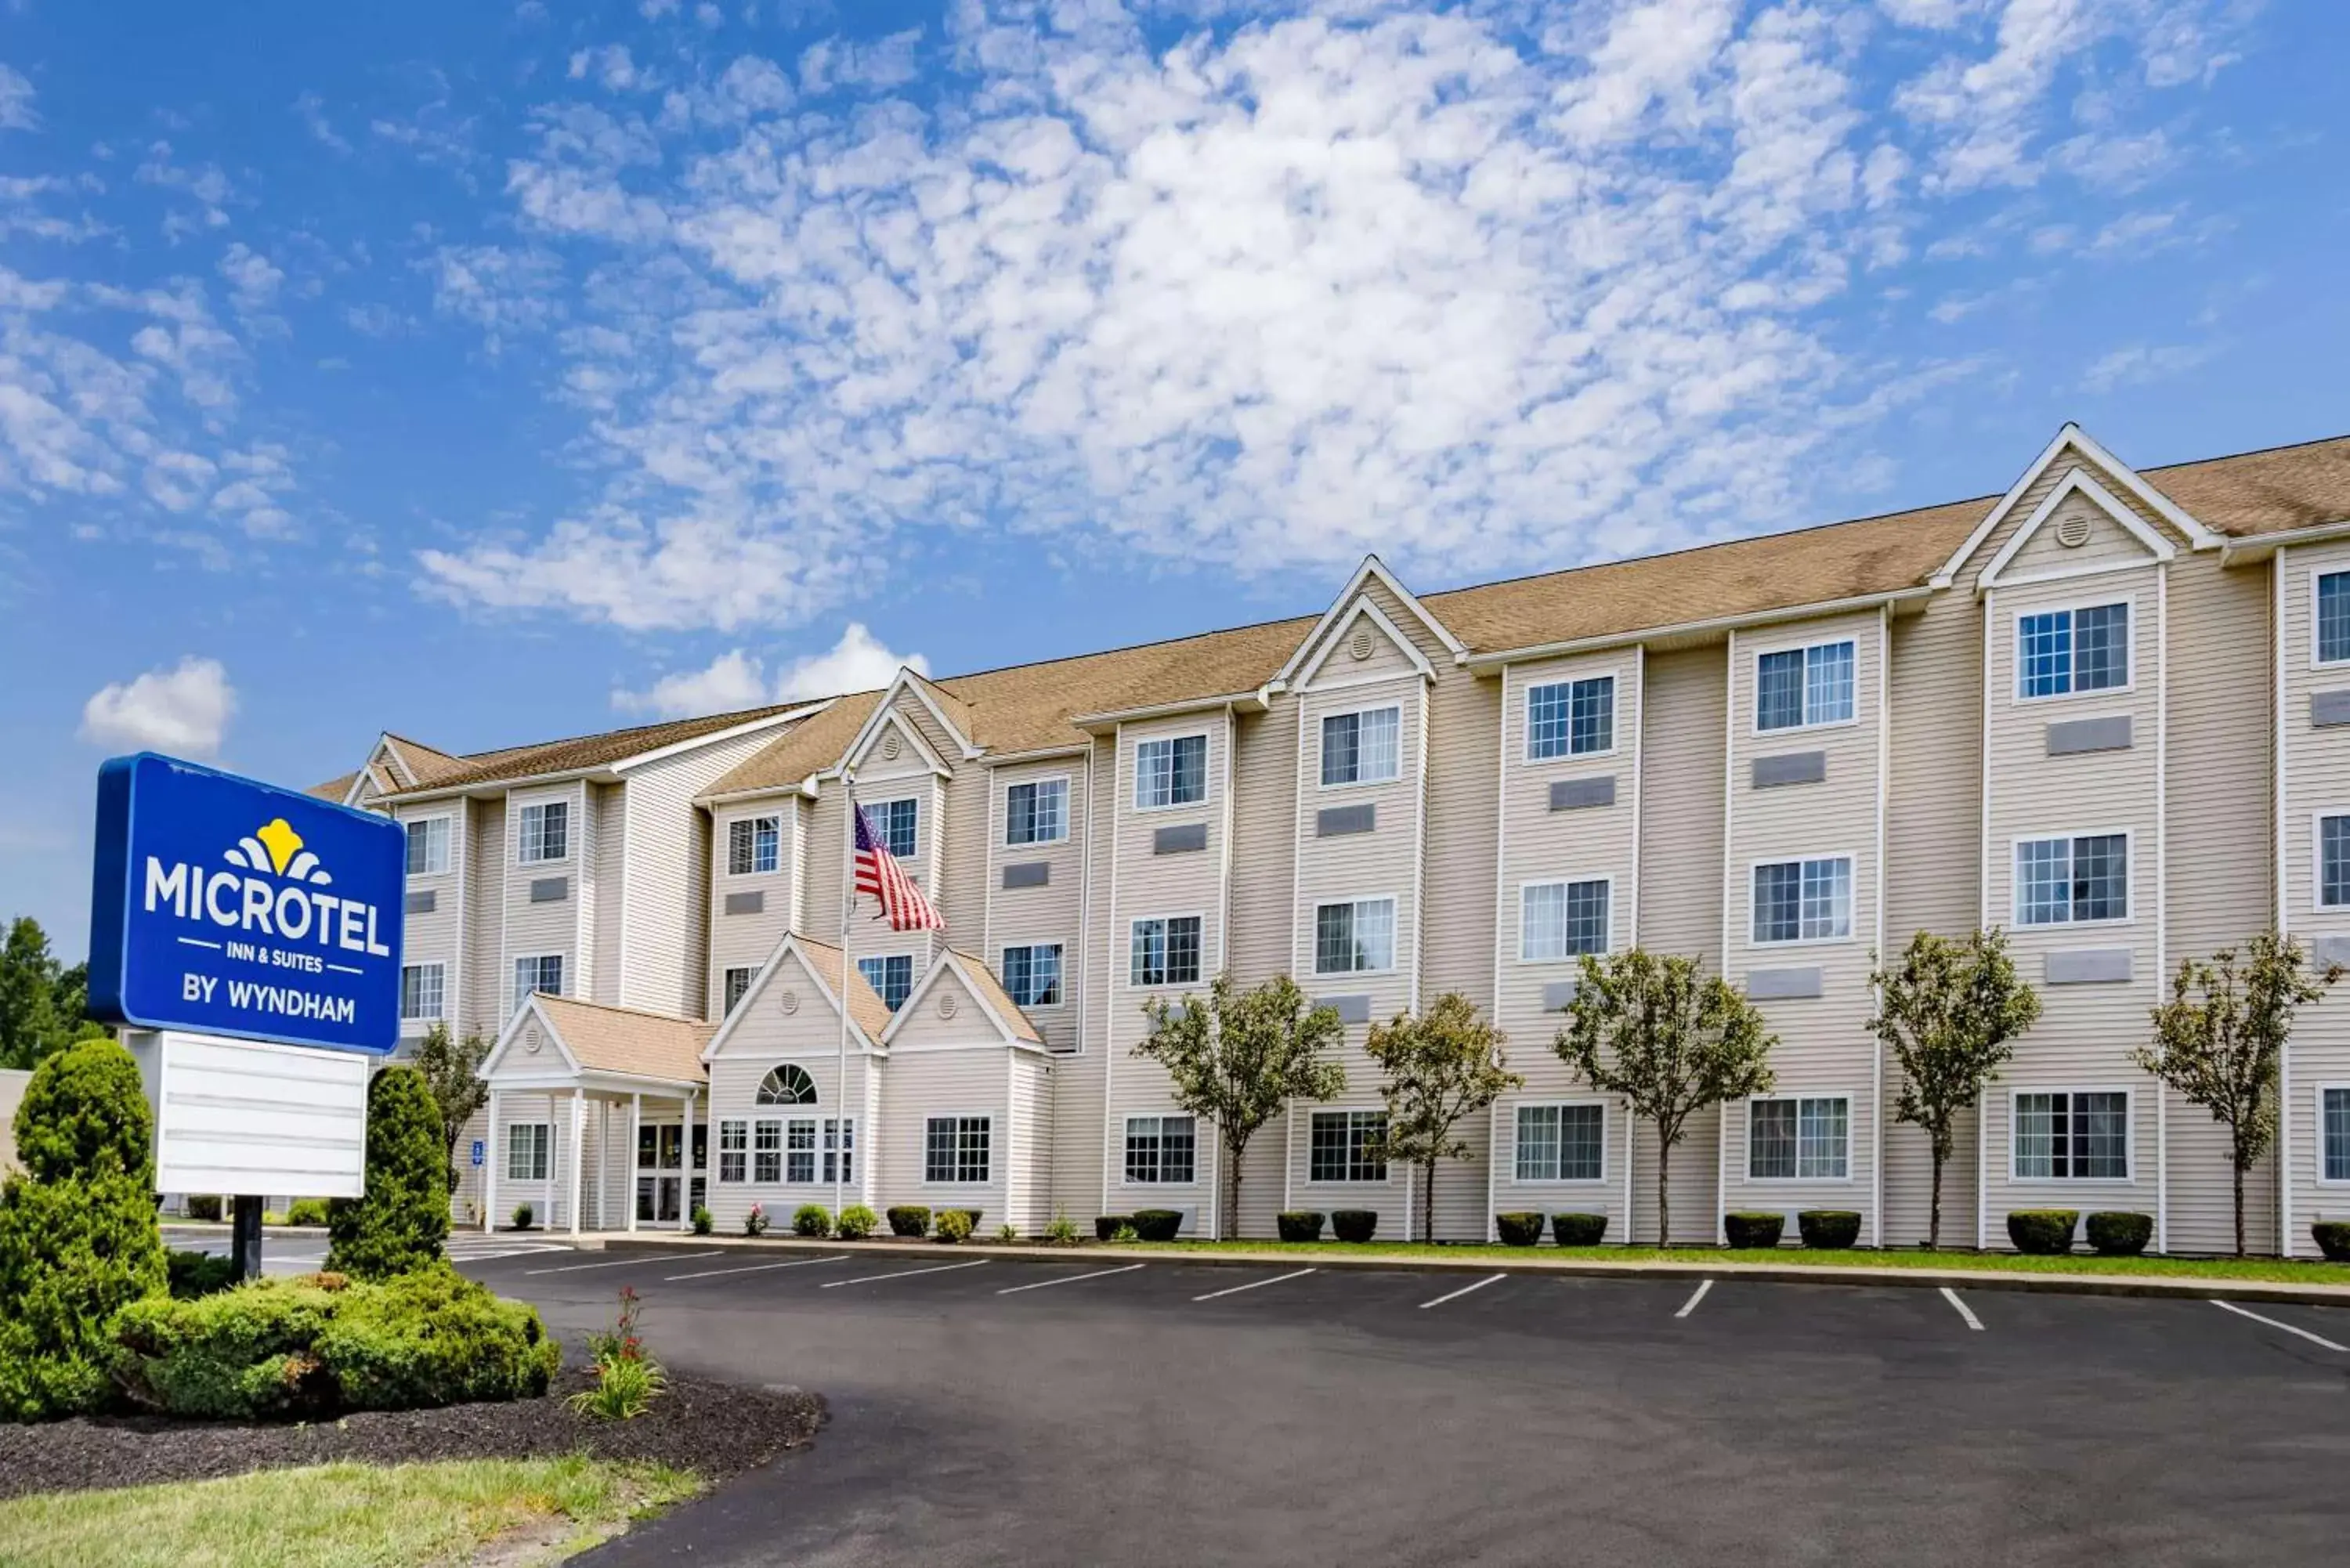 Property Building in Microtel Inn & Suites by Wyndham Johnstown